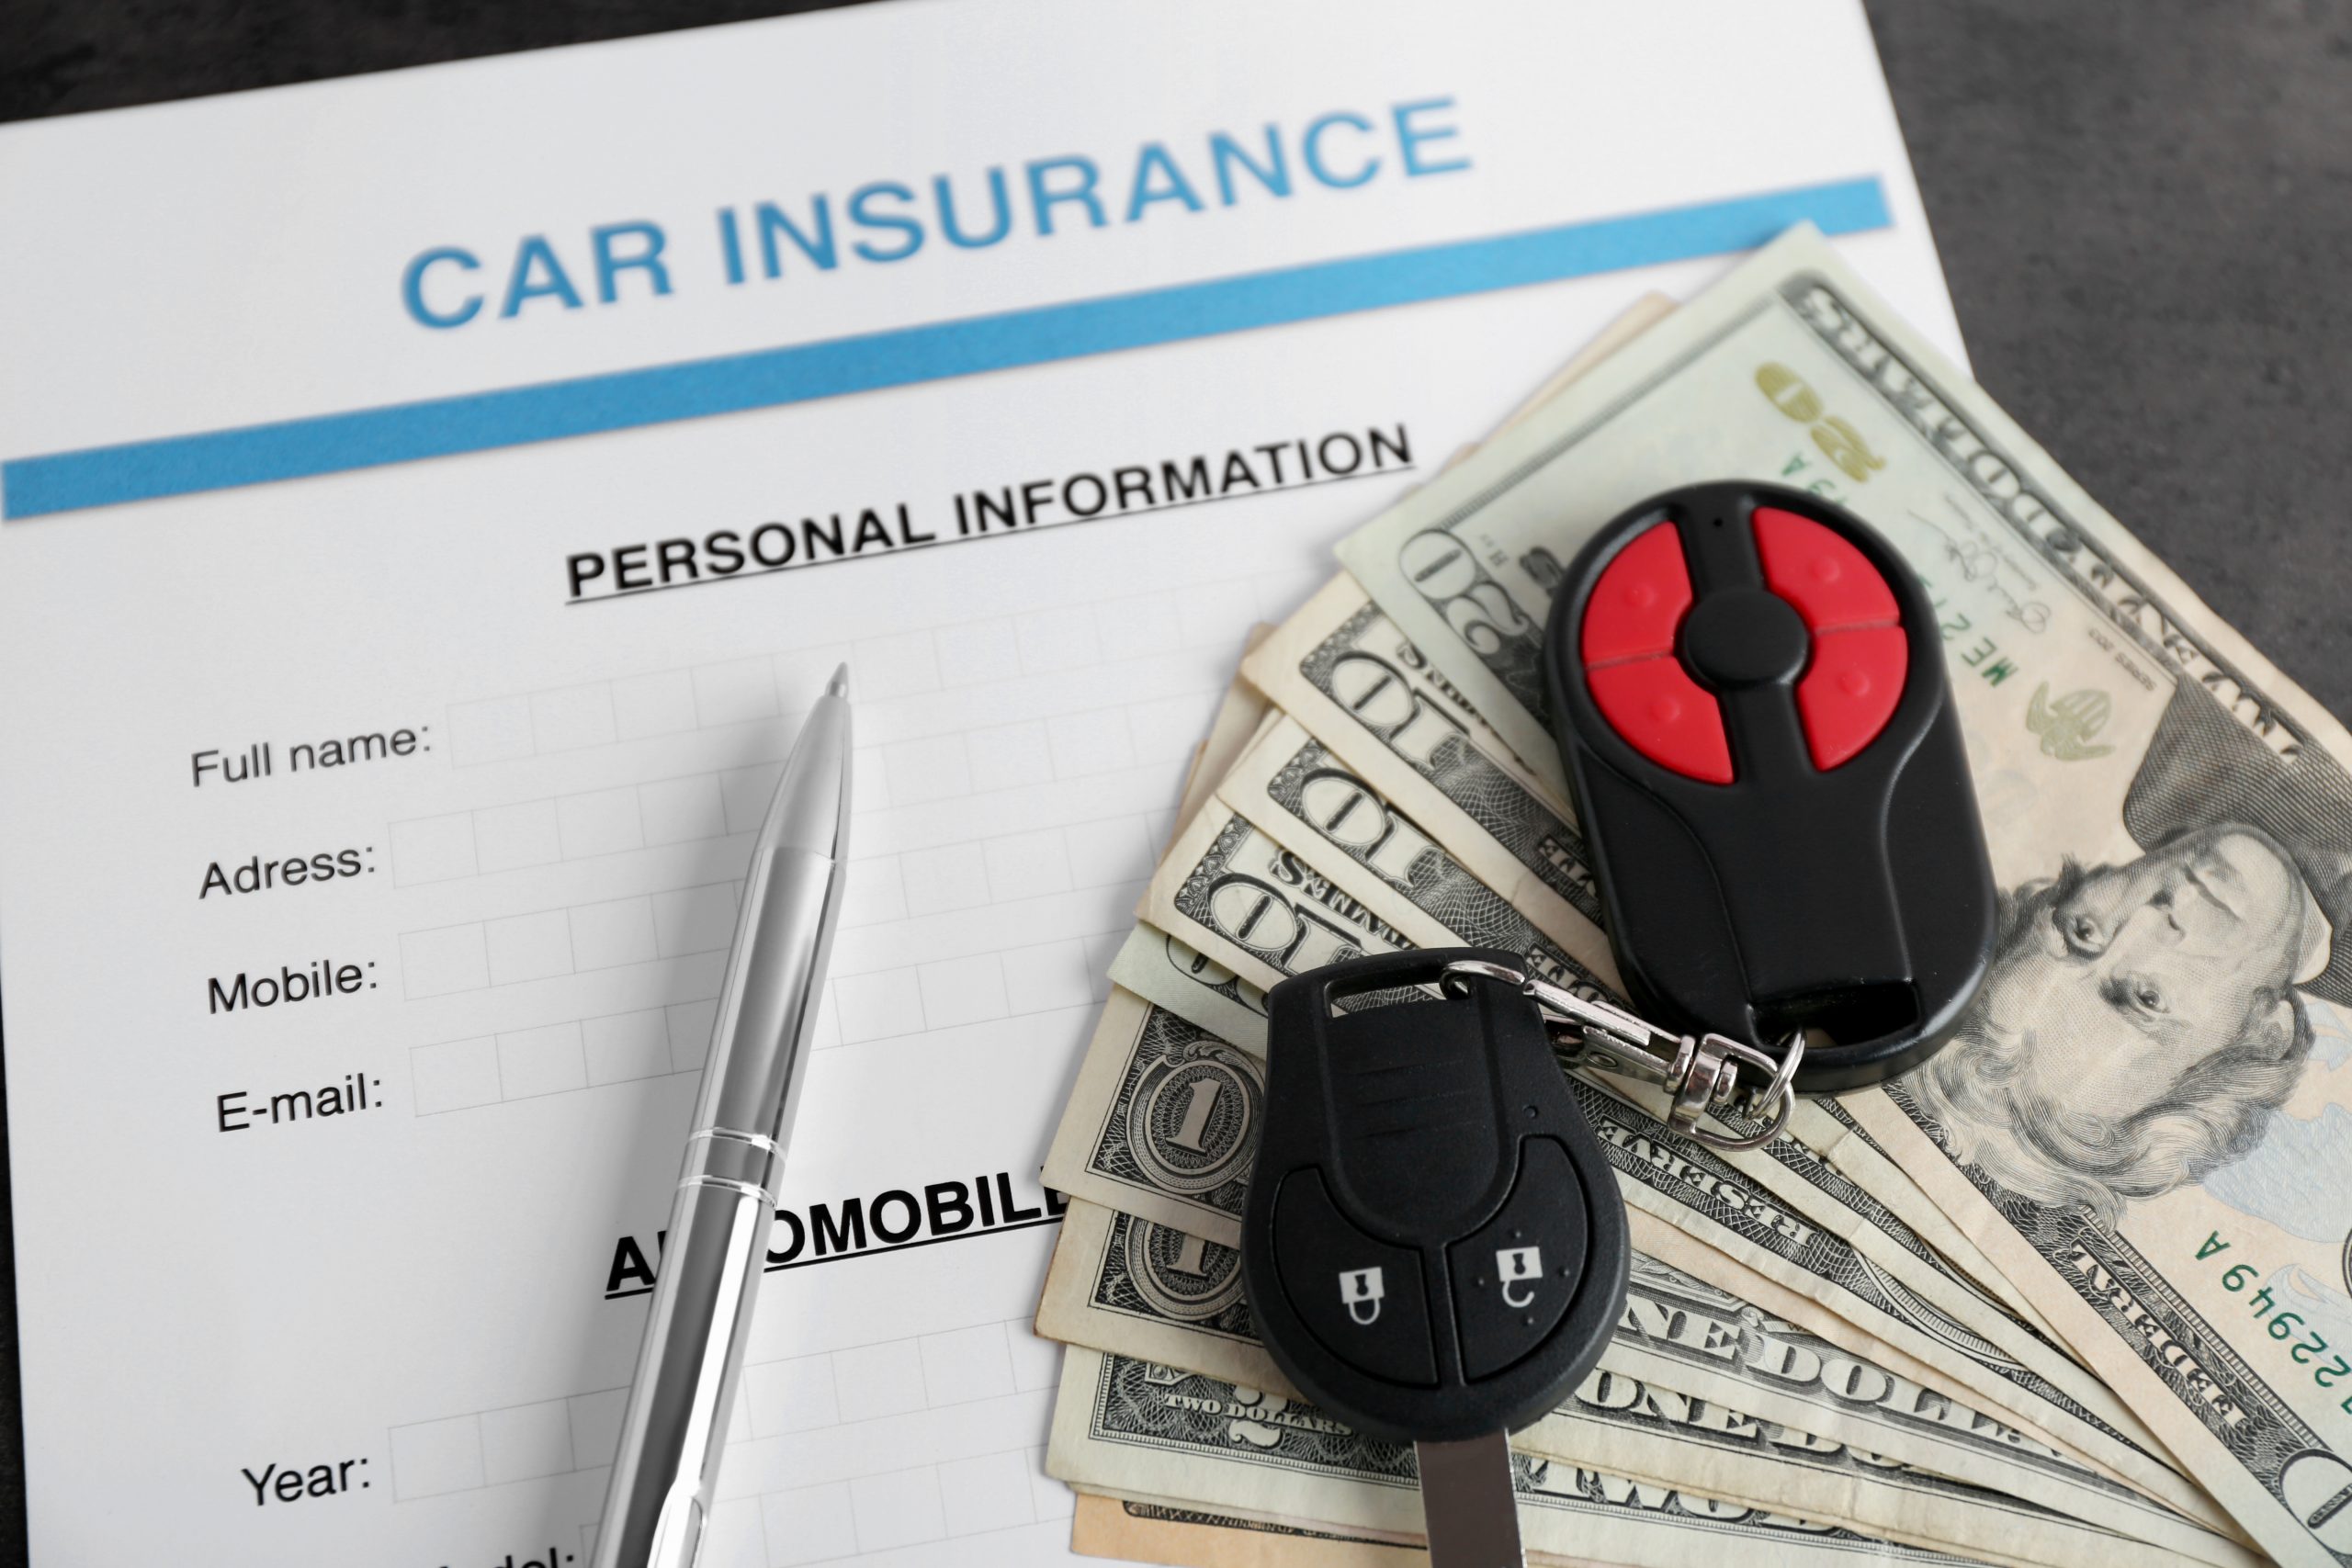 Auto Insurance Companies in the US